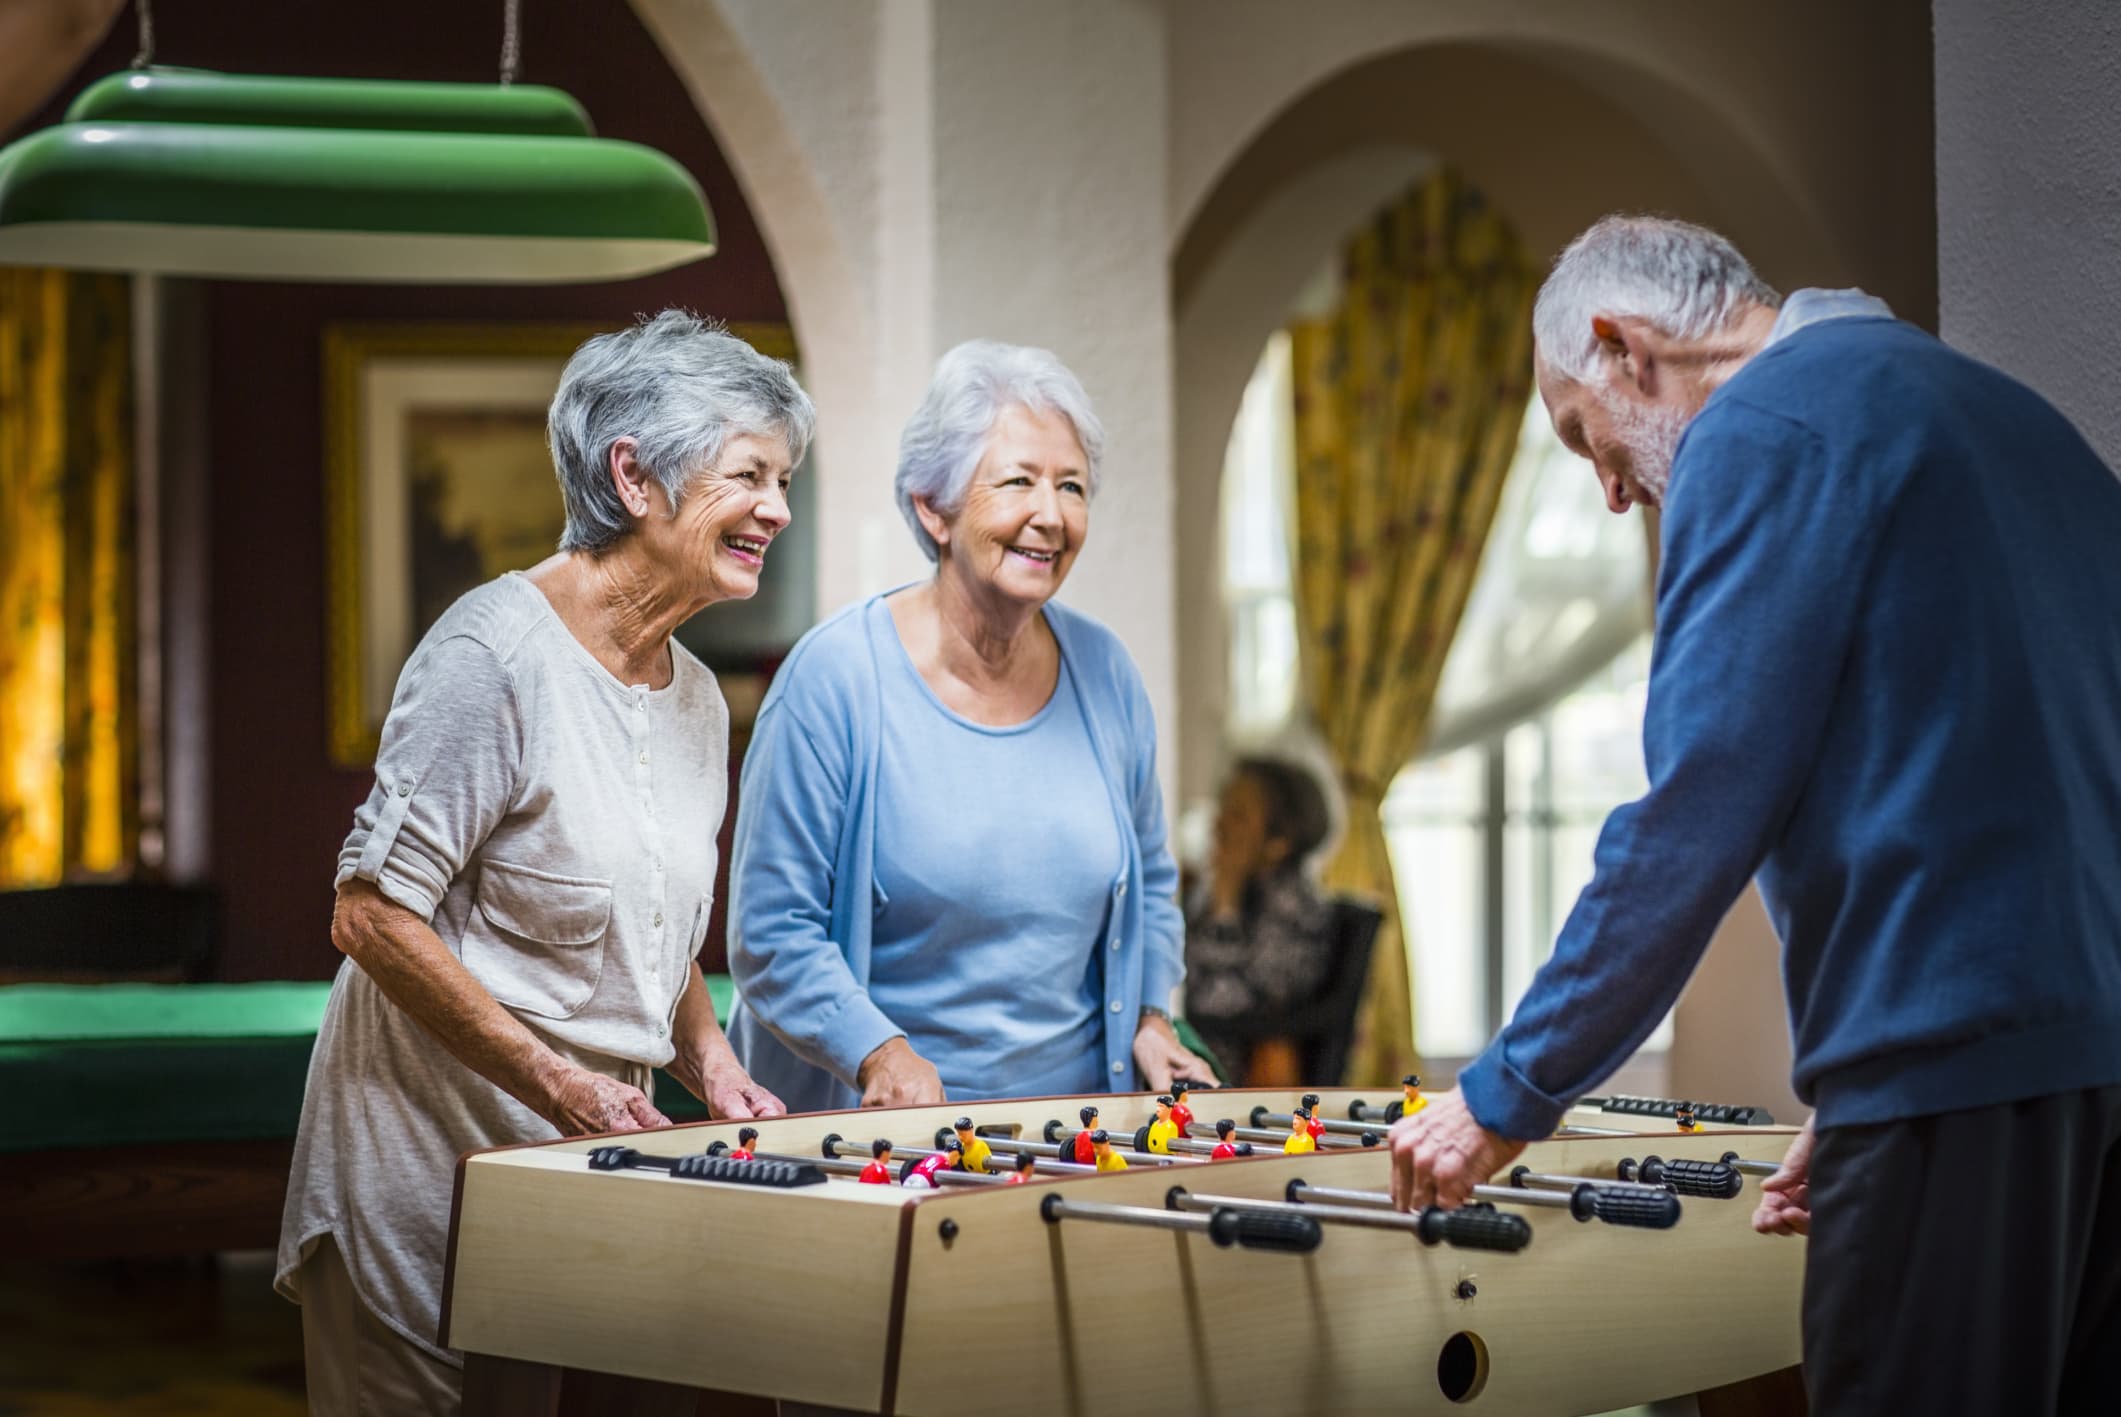 Aging in place vs. assisted living … It's complicated